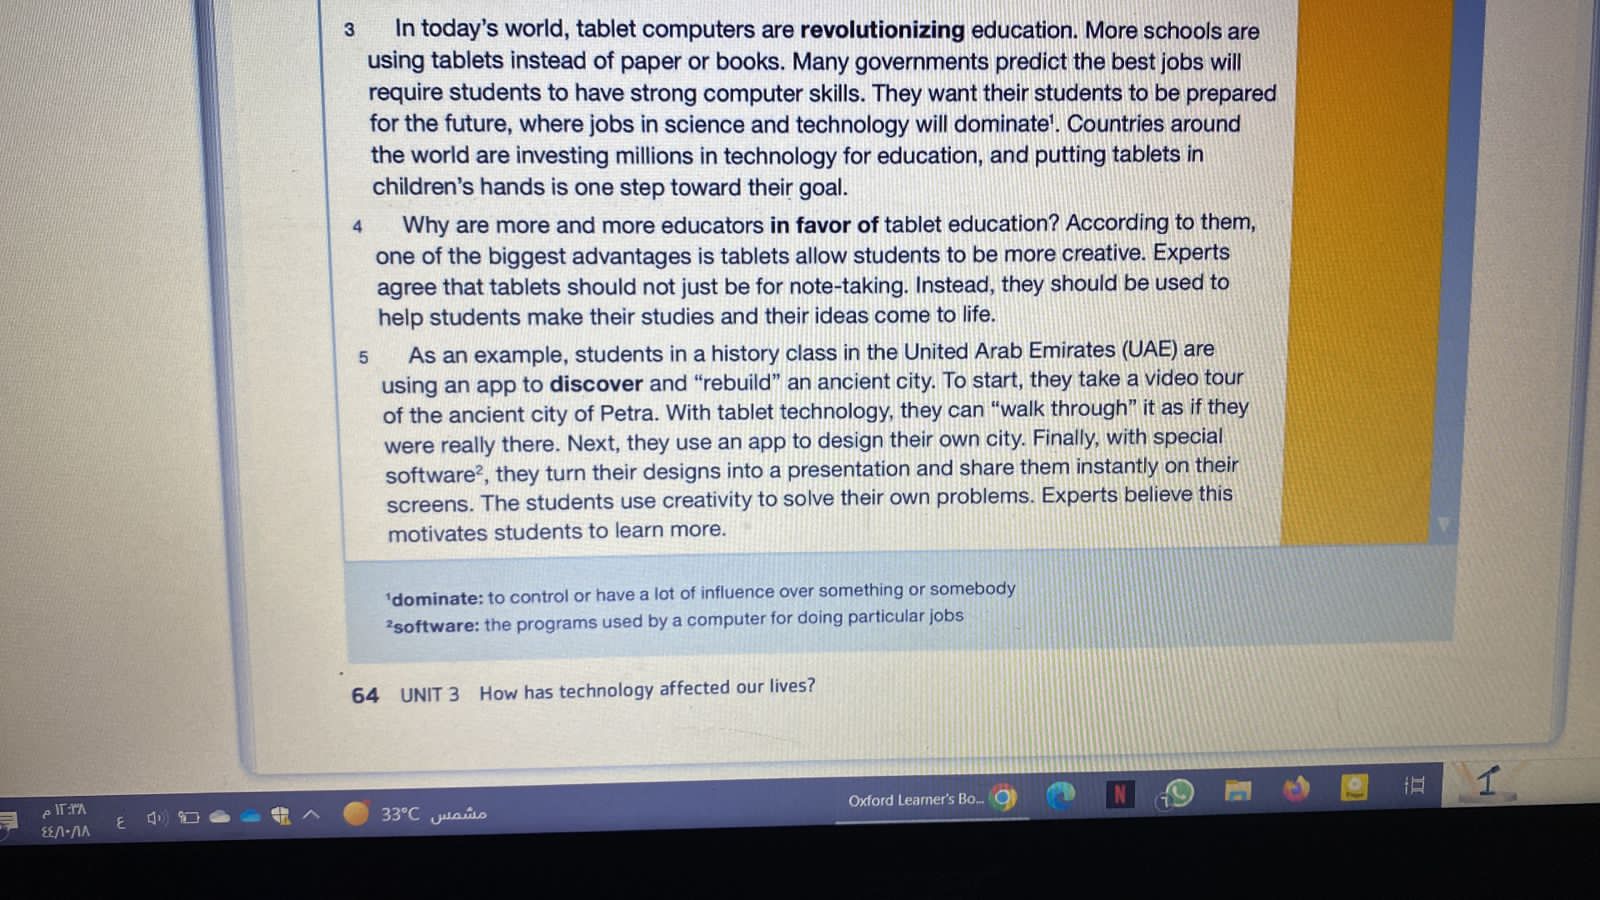 Level 3 - Writing Assignment, we ONLY use Reading and